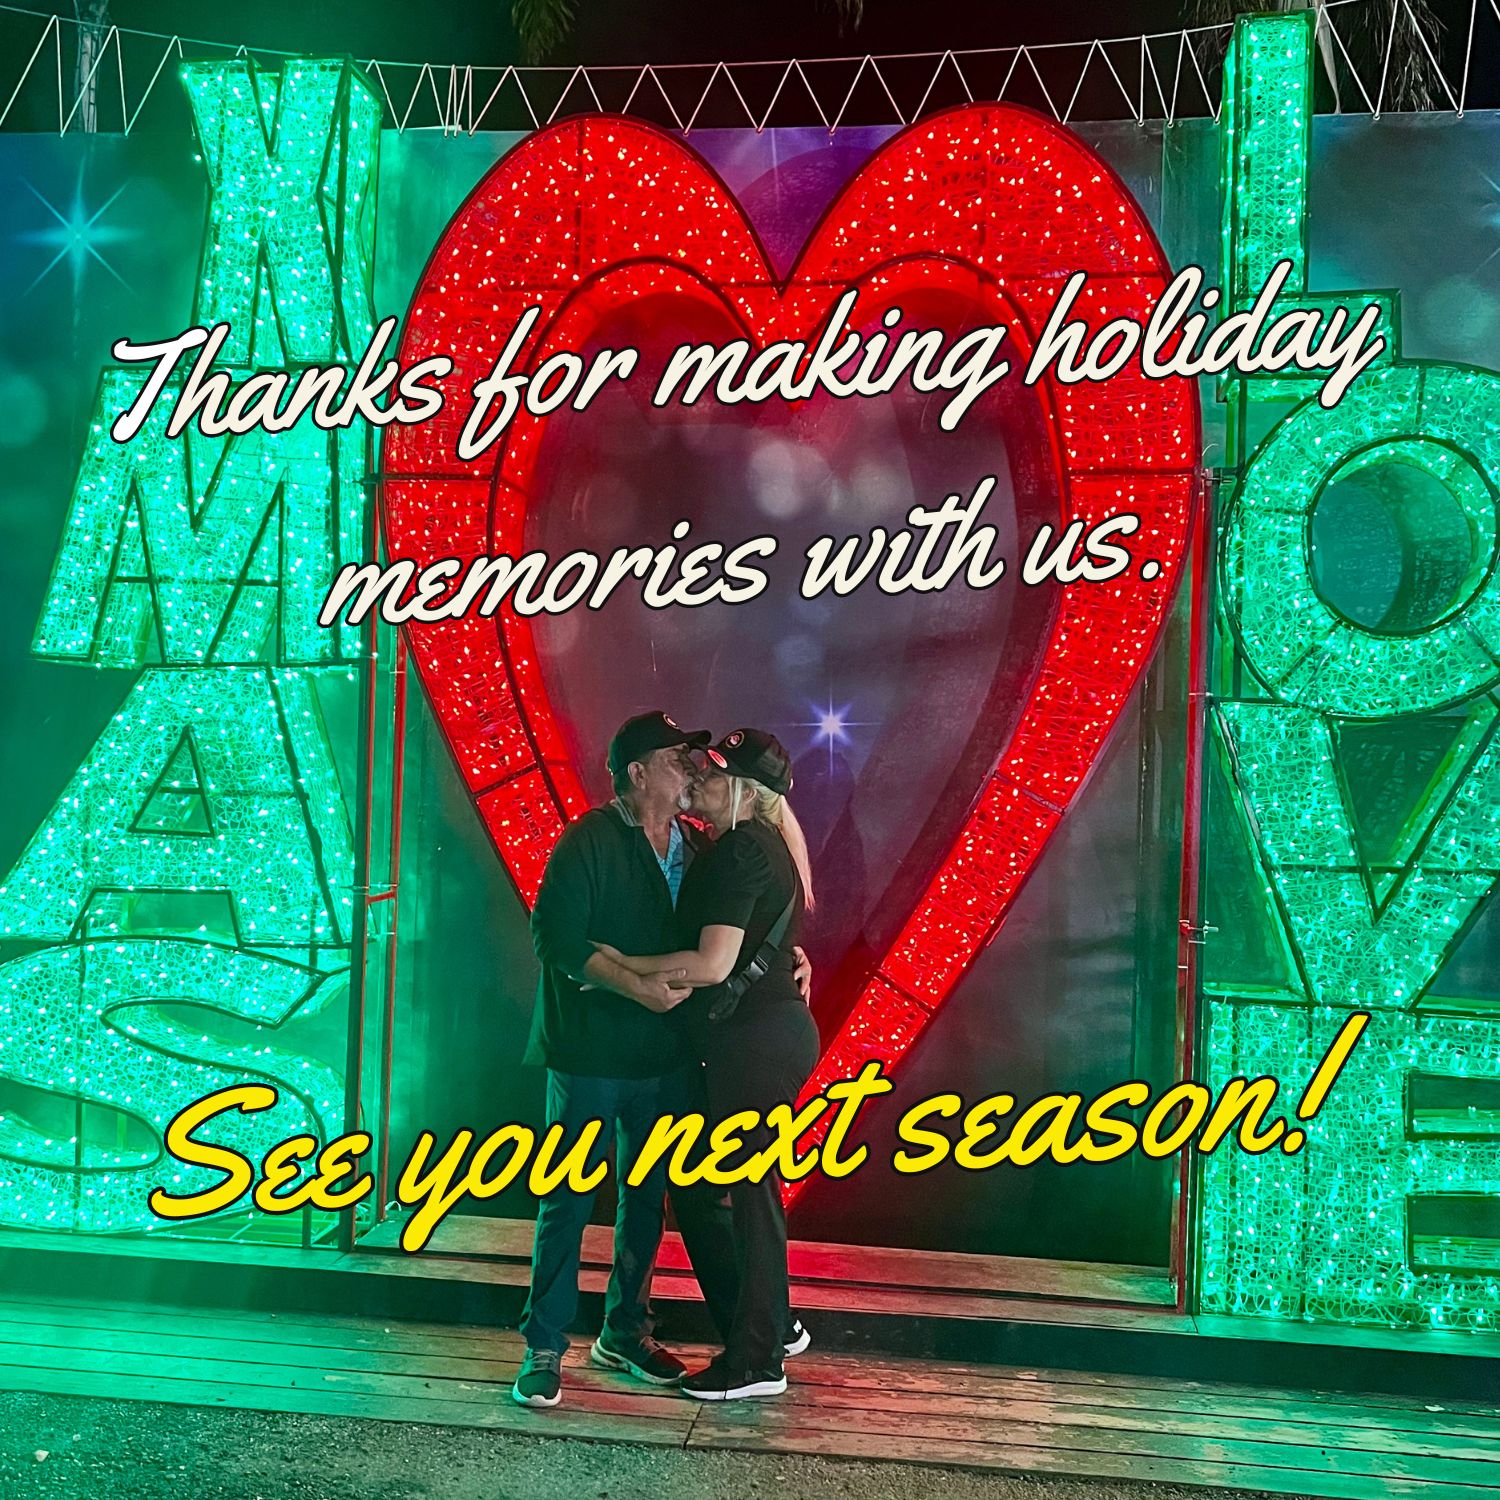 Thanks for making holiday memories with us!